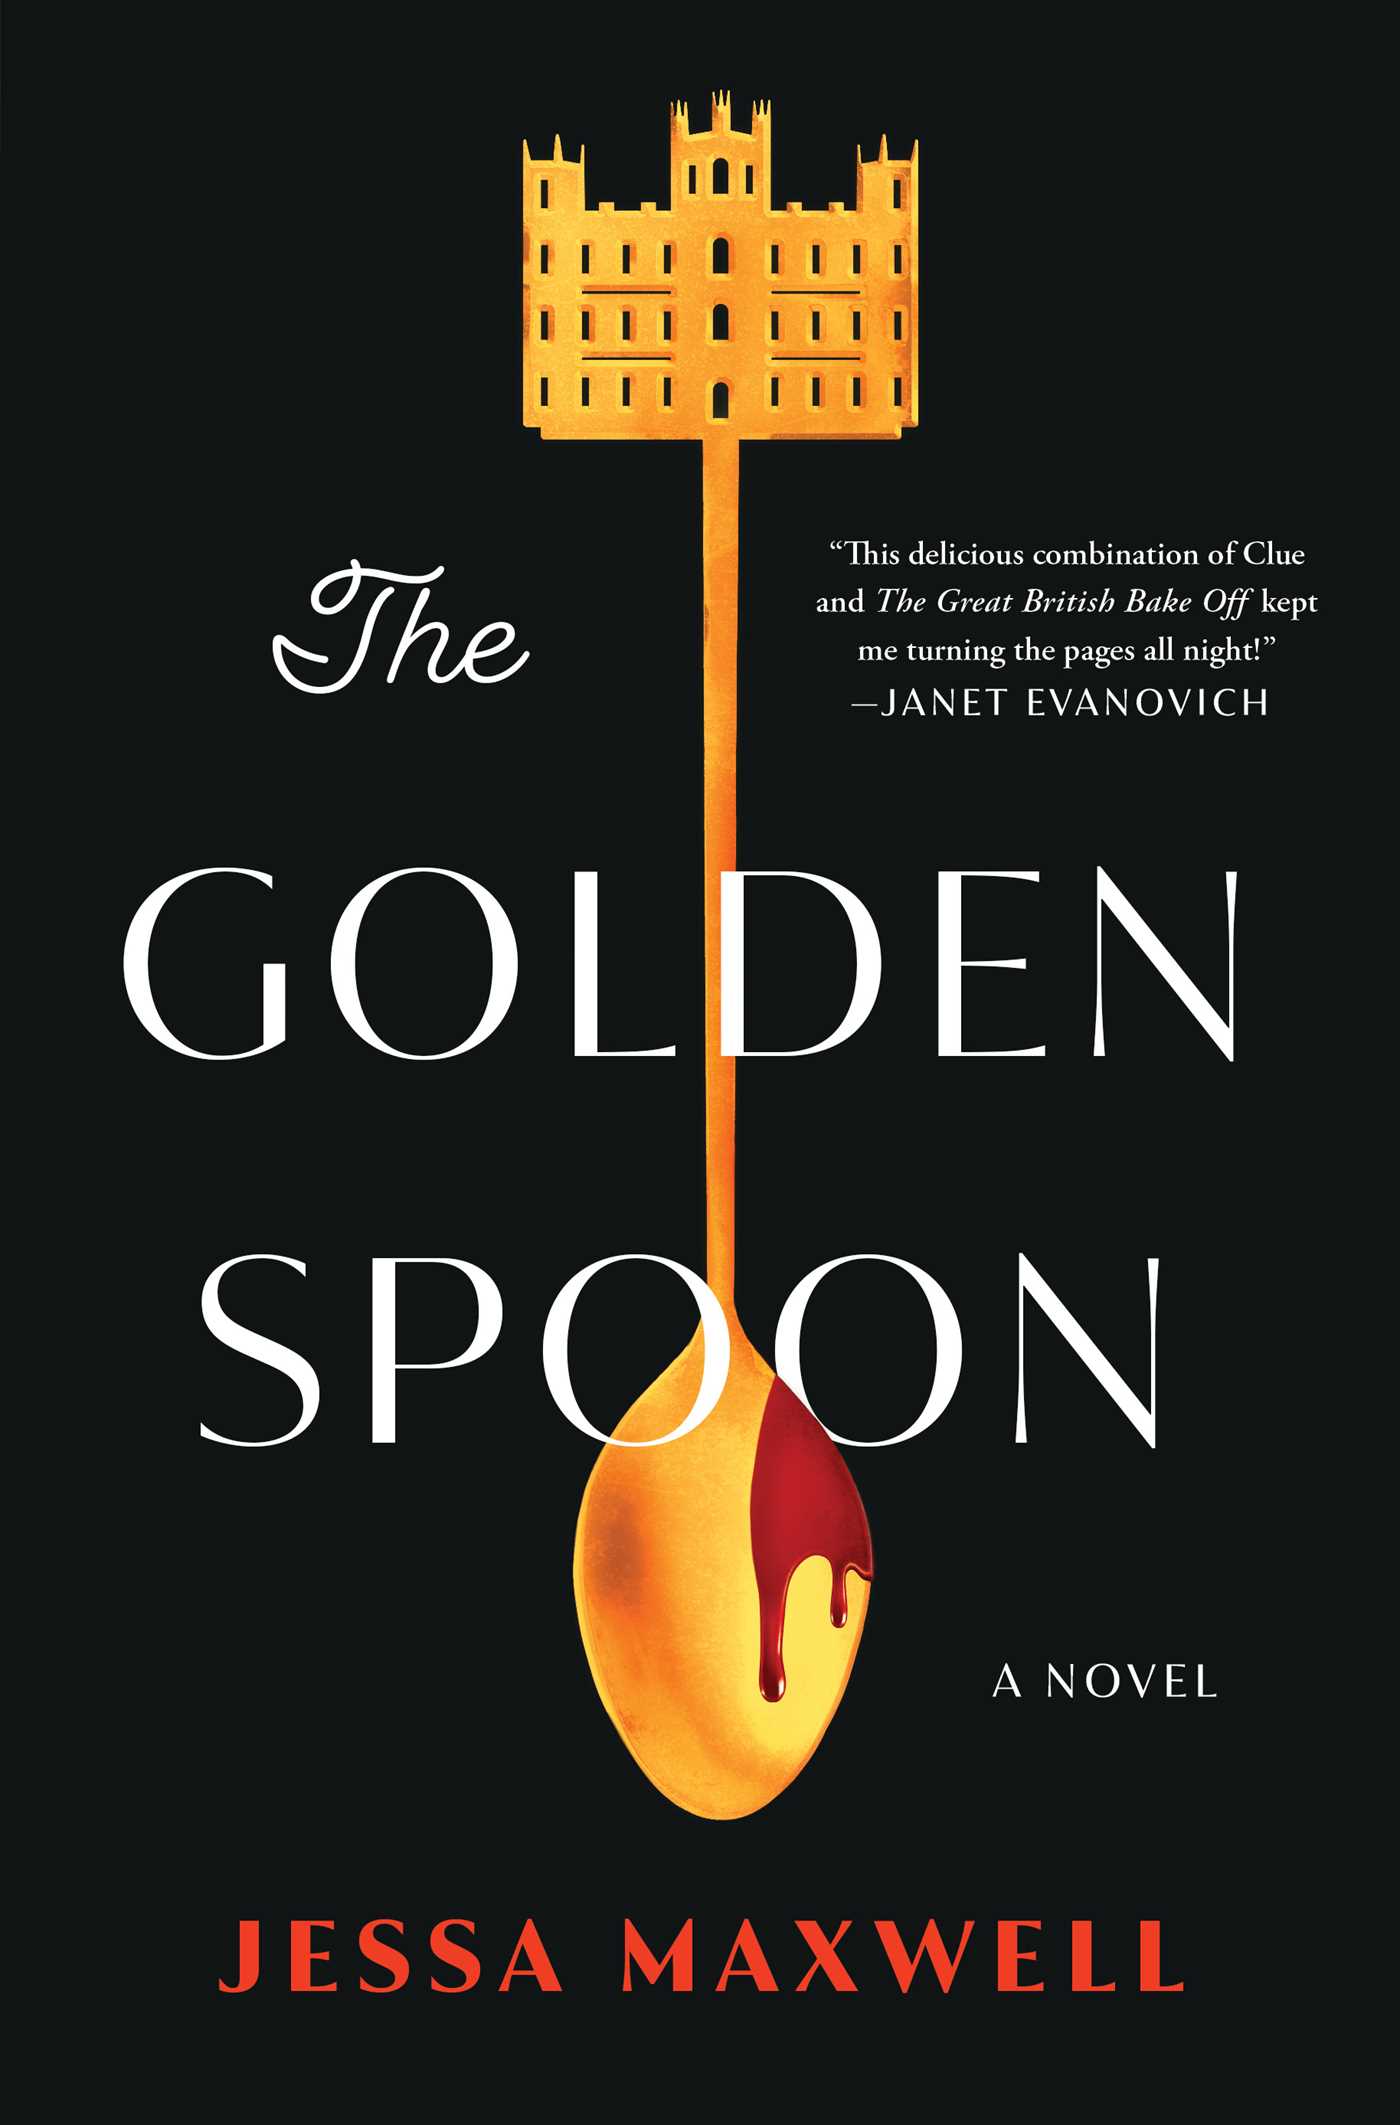 Image for "The Golden Spoon"